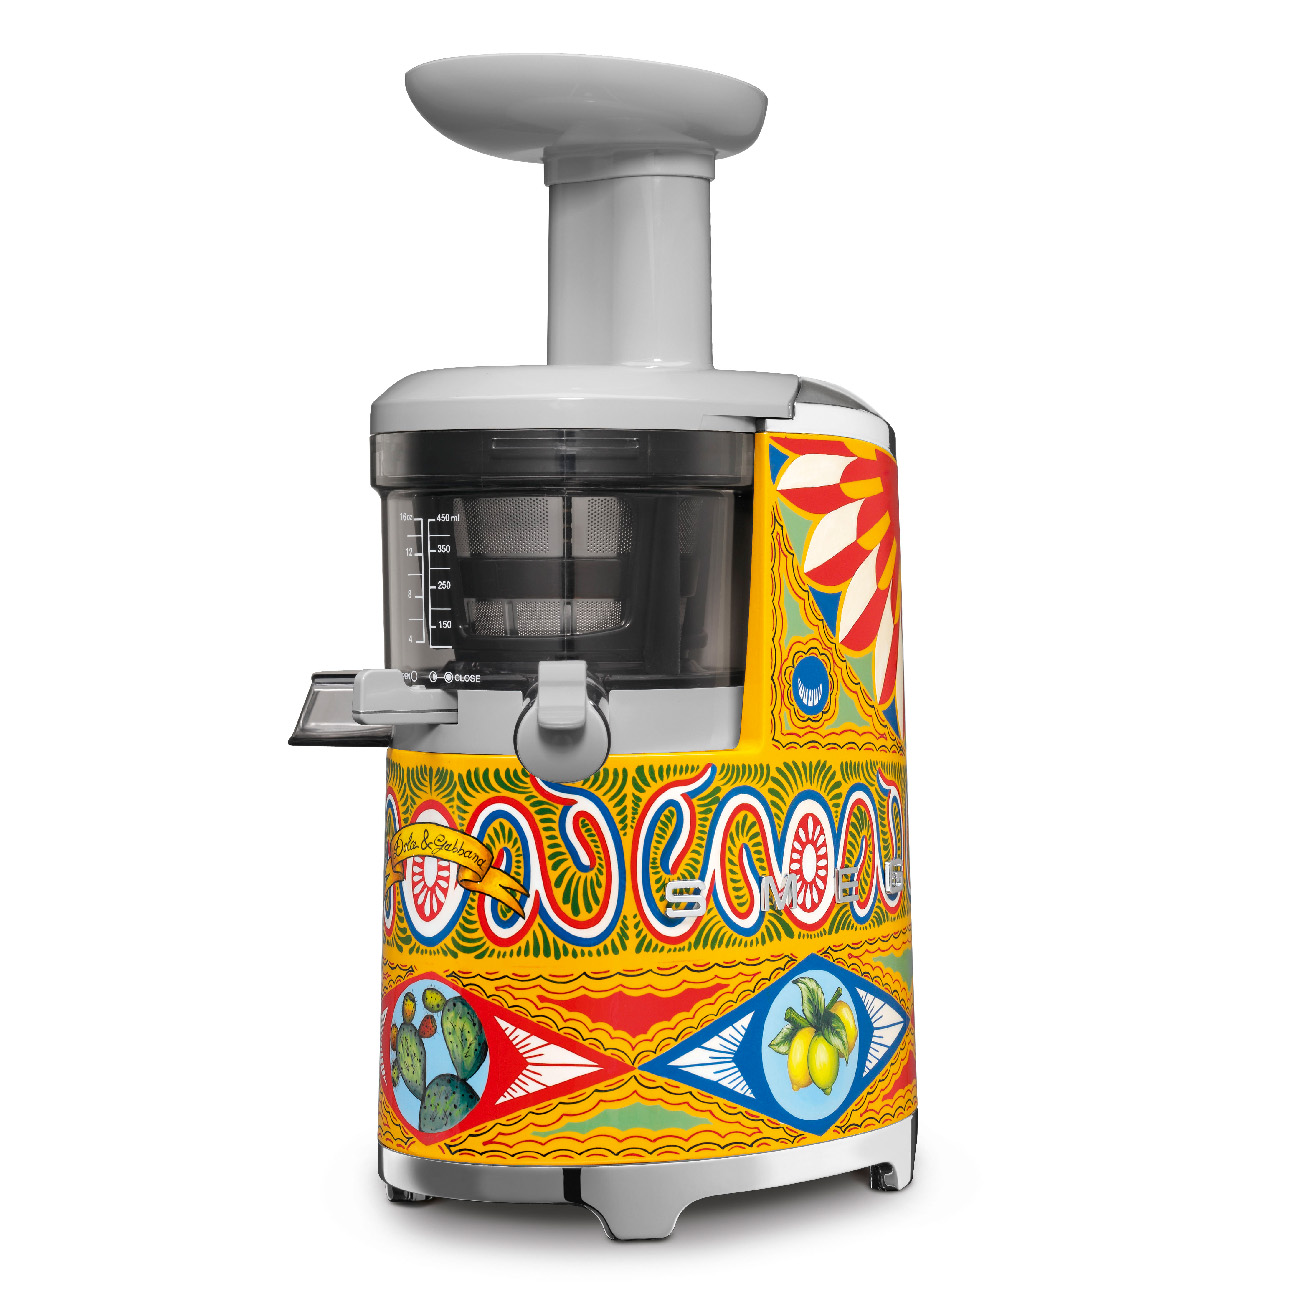 Luxury, designer slow juicer featuring an intricate, colourful and abstract design of sunshine, fruit and wiggly shapes. By Smeg & Dolce&Gabbana & Smeg_2